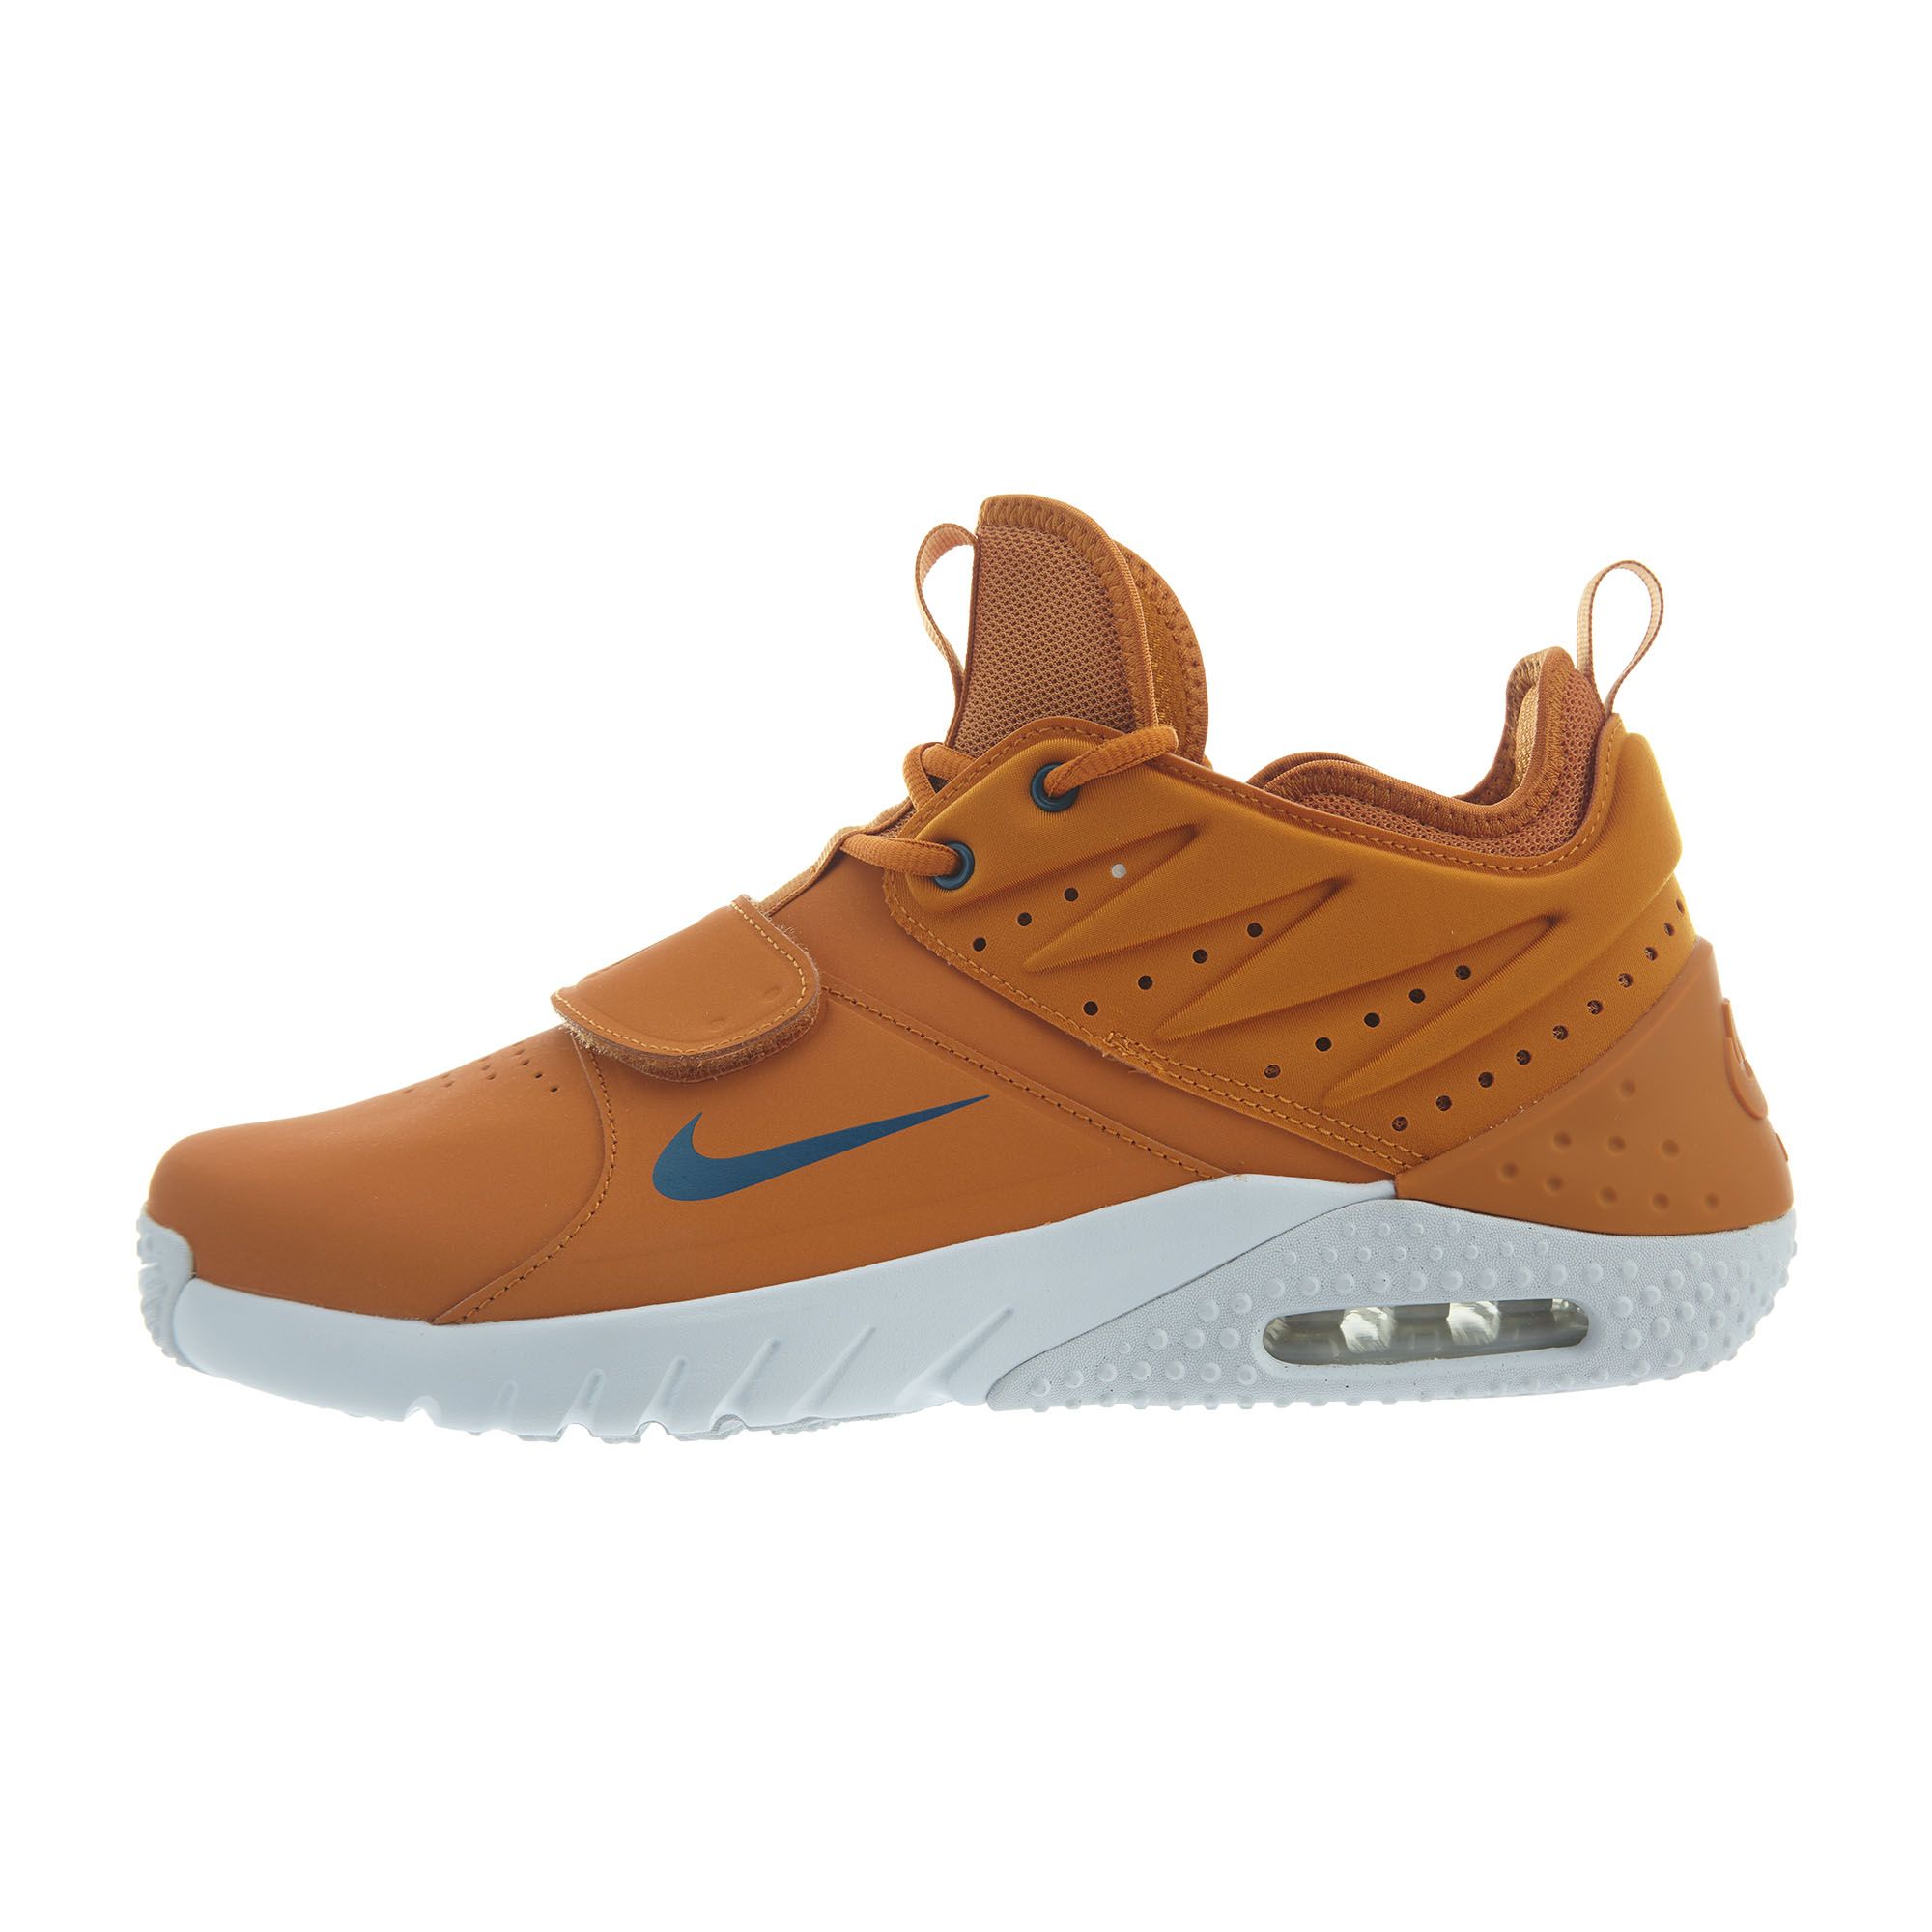 Nike Air Max Trainer 1 Leather Mens 